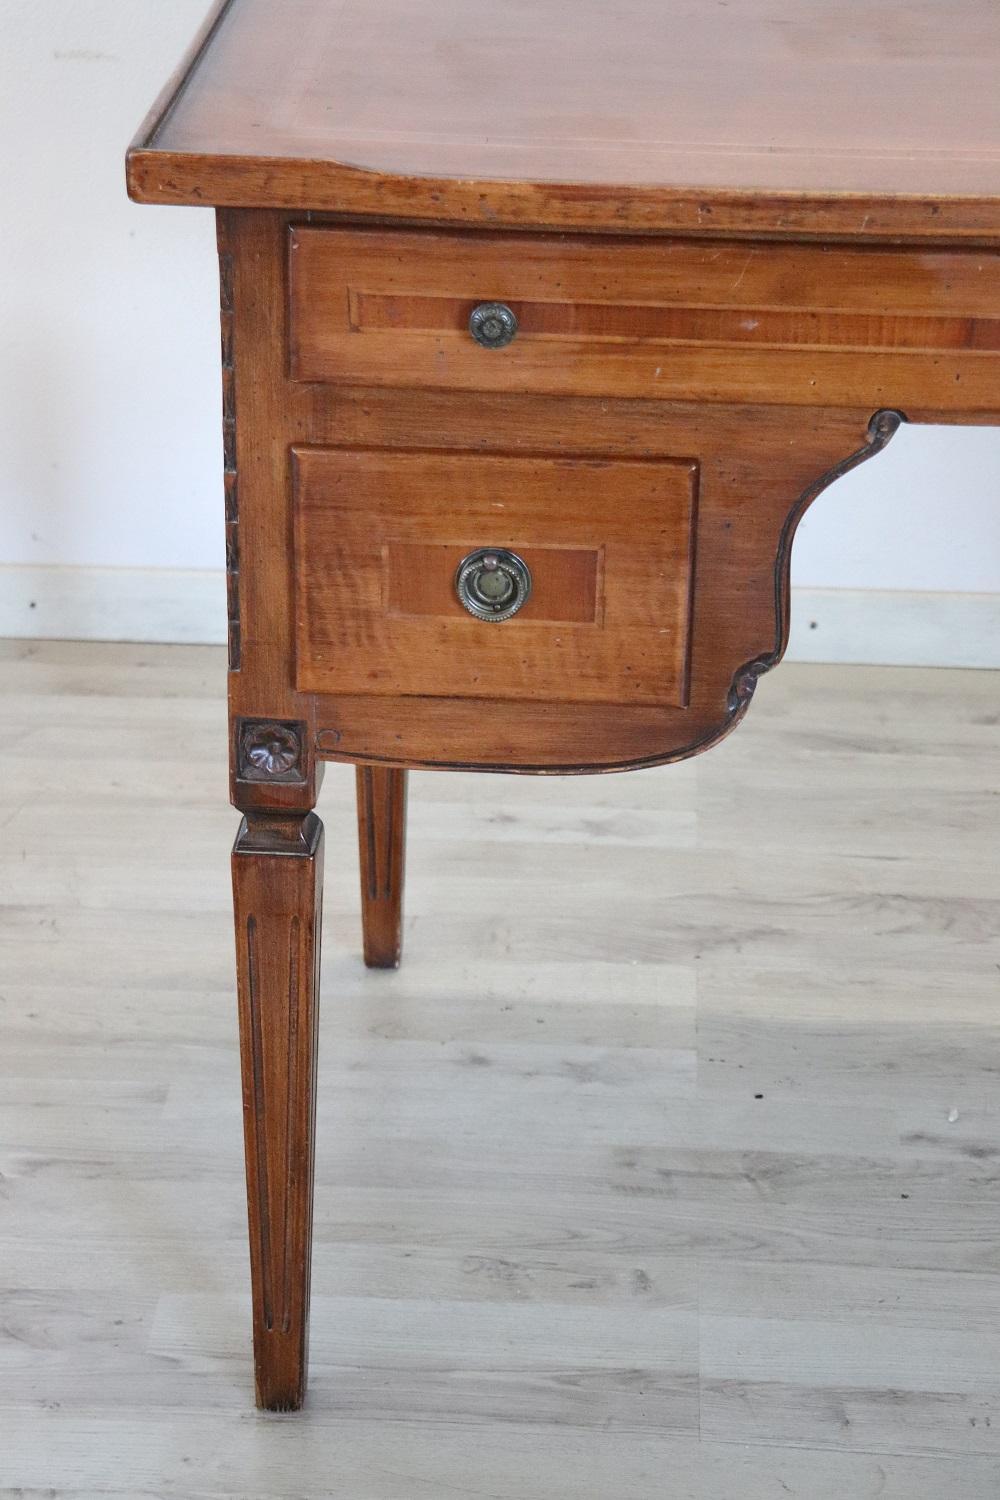 Elegant Italian Louis XVI style writing desk. Rare and precious solid walnut wood. Comfortable size for a practical use. The desk has elegant straight legs. Equipped with four practical drawers. The wooden decoration is on each side so it is